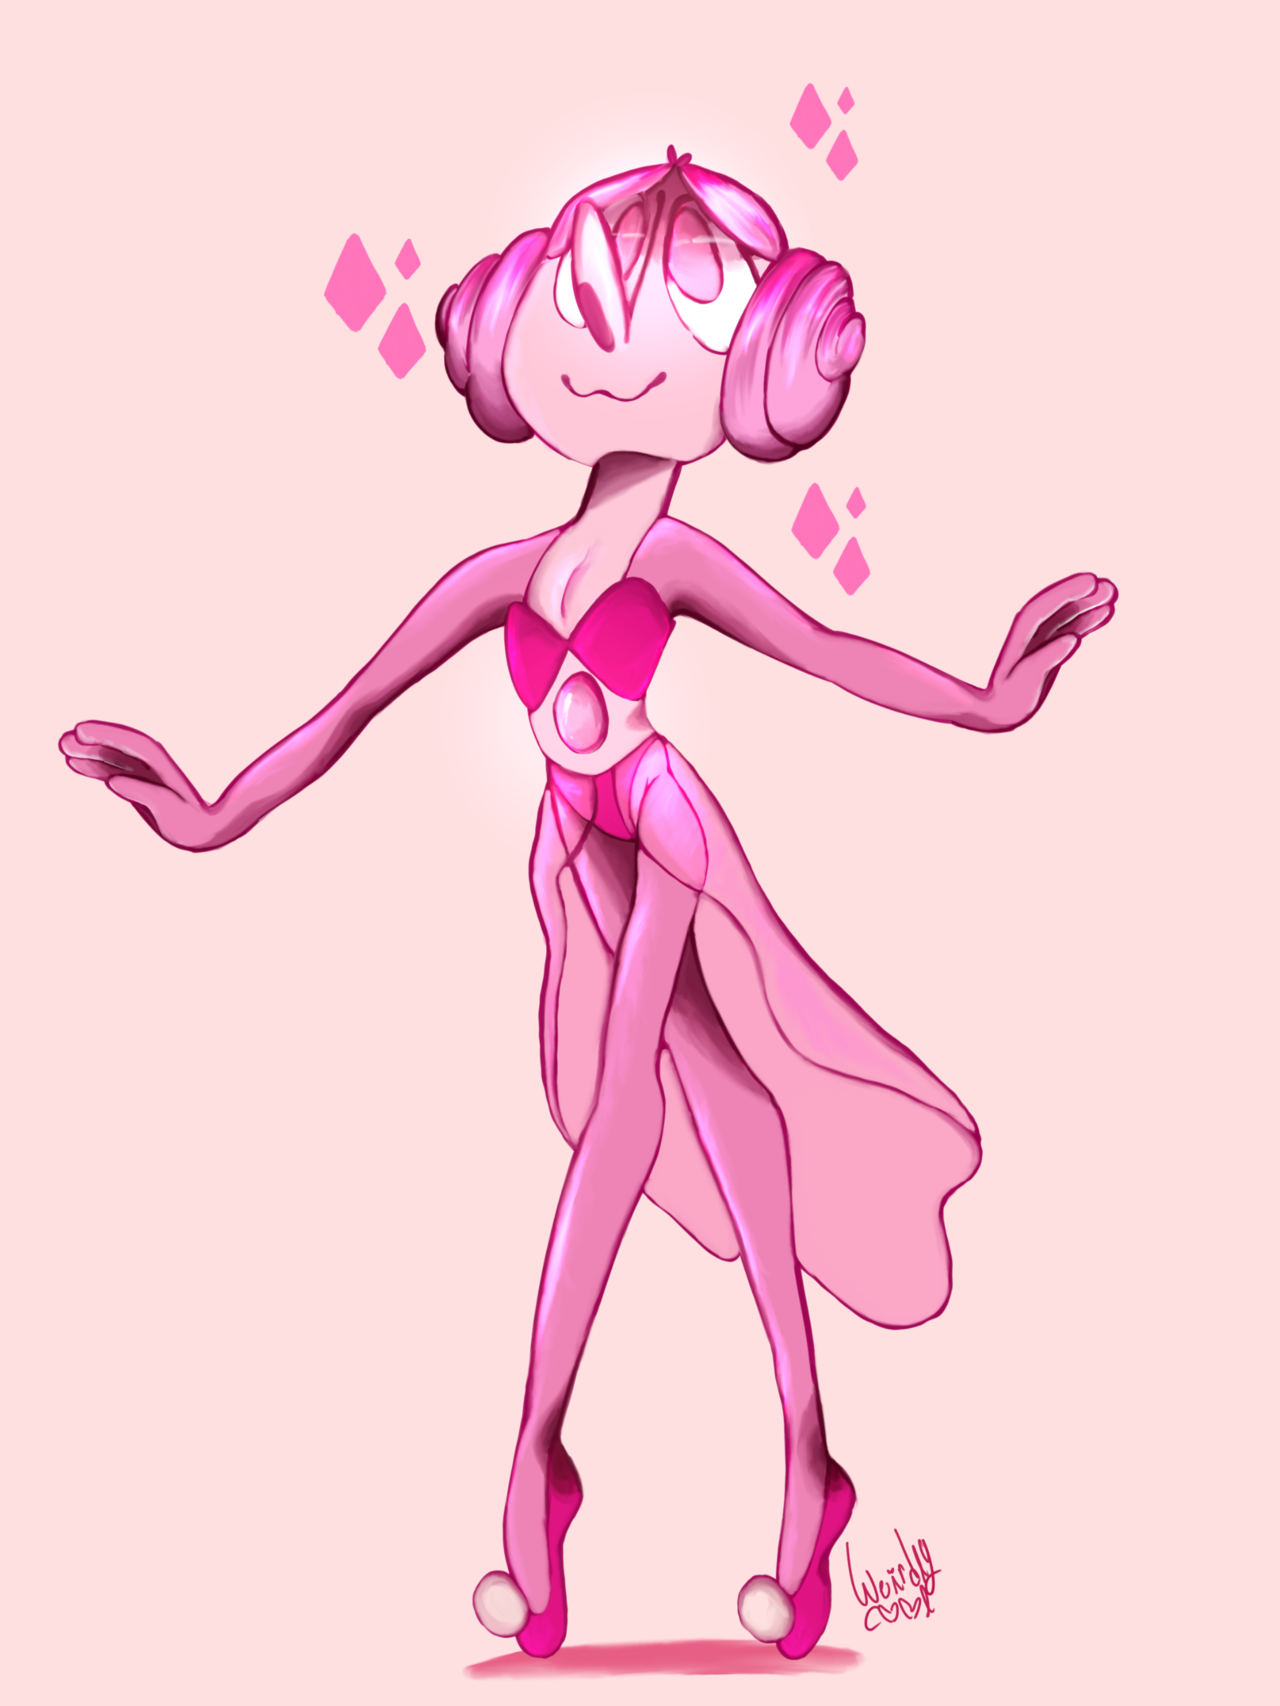 I rlly think white daimonds pearl was pinks